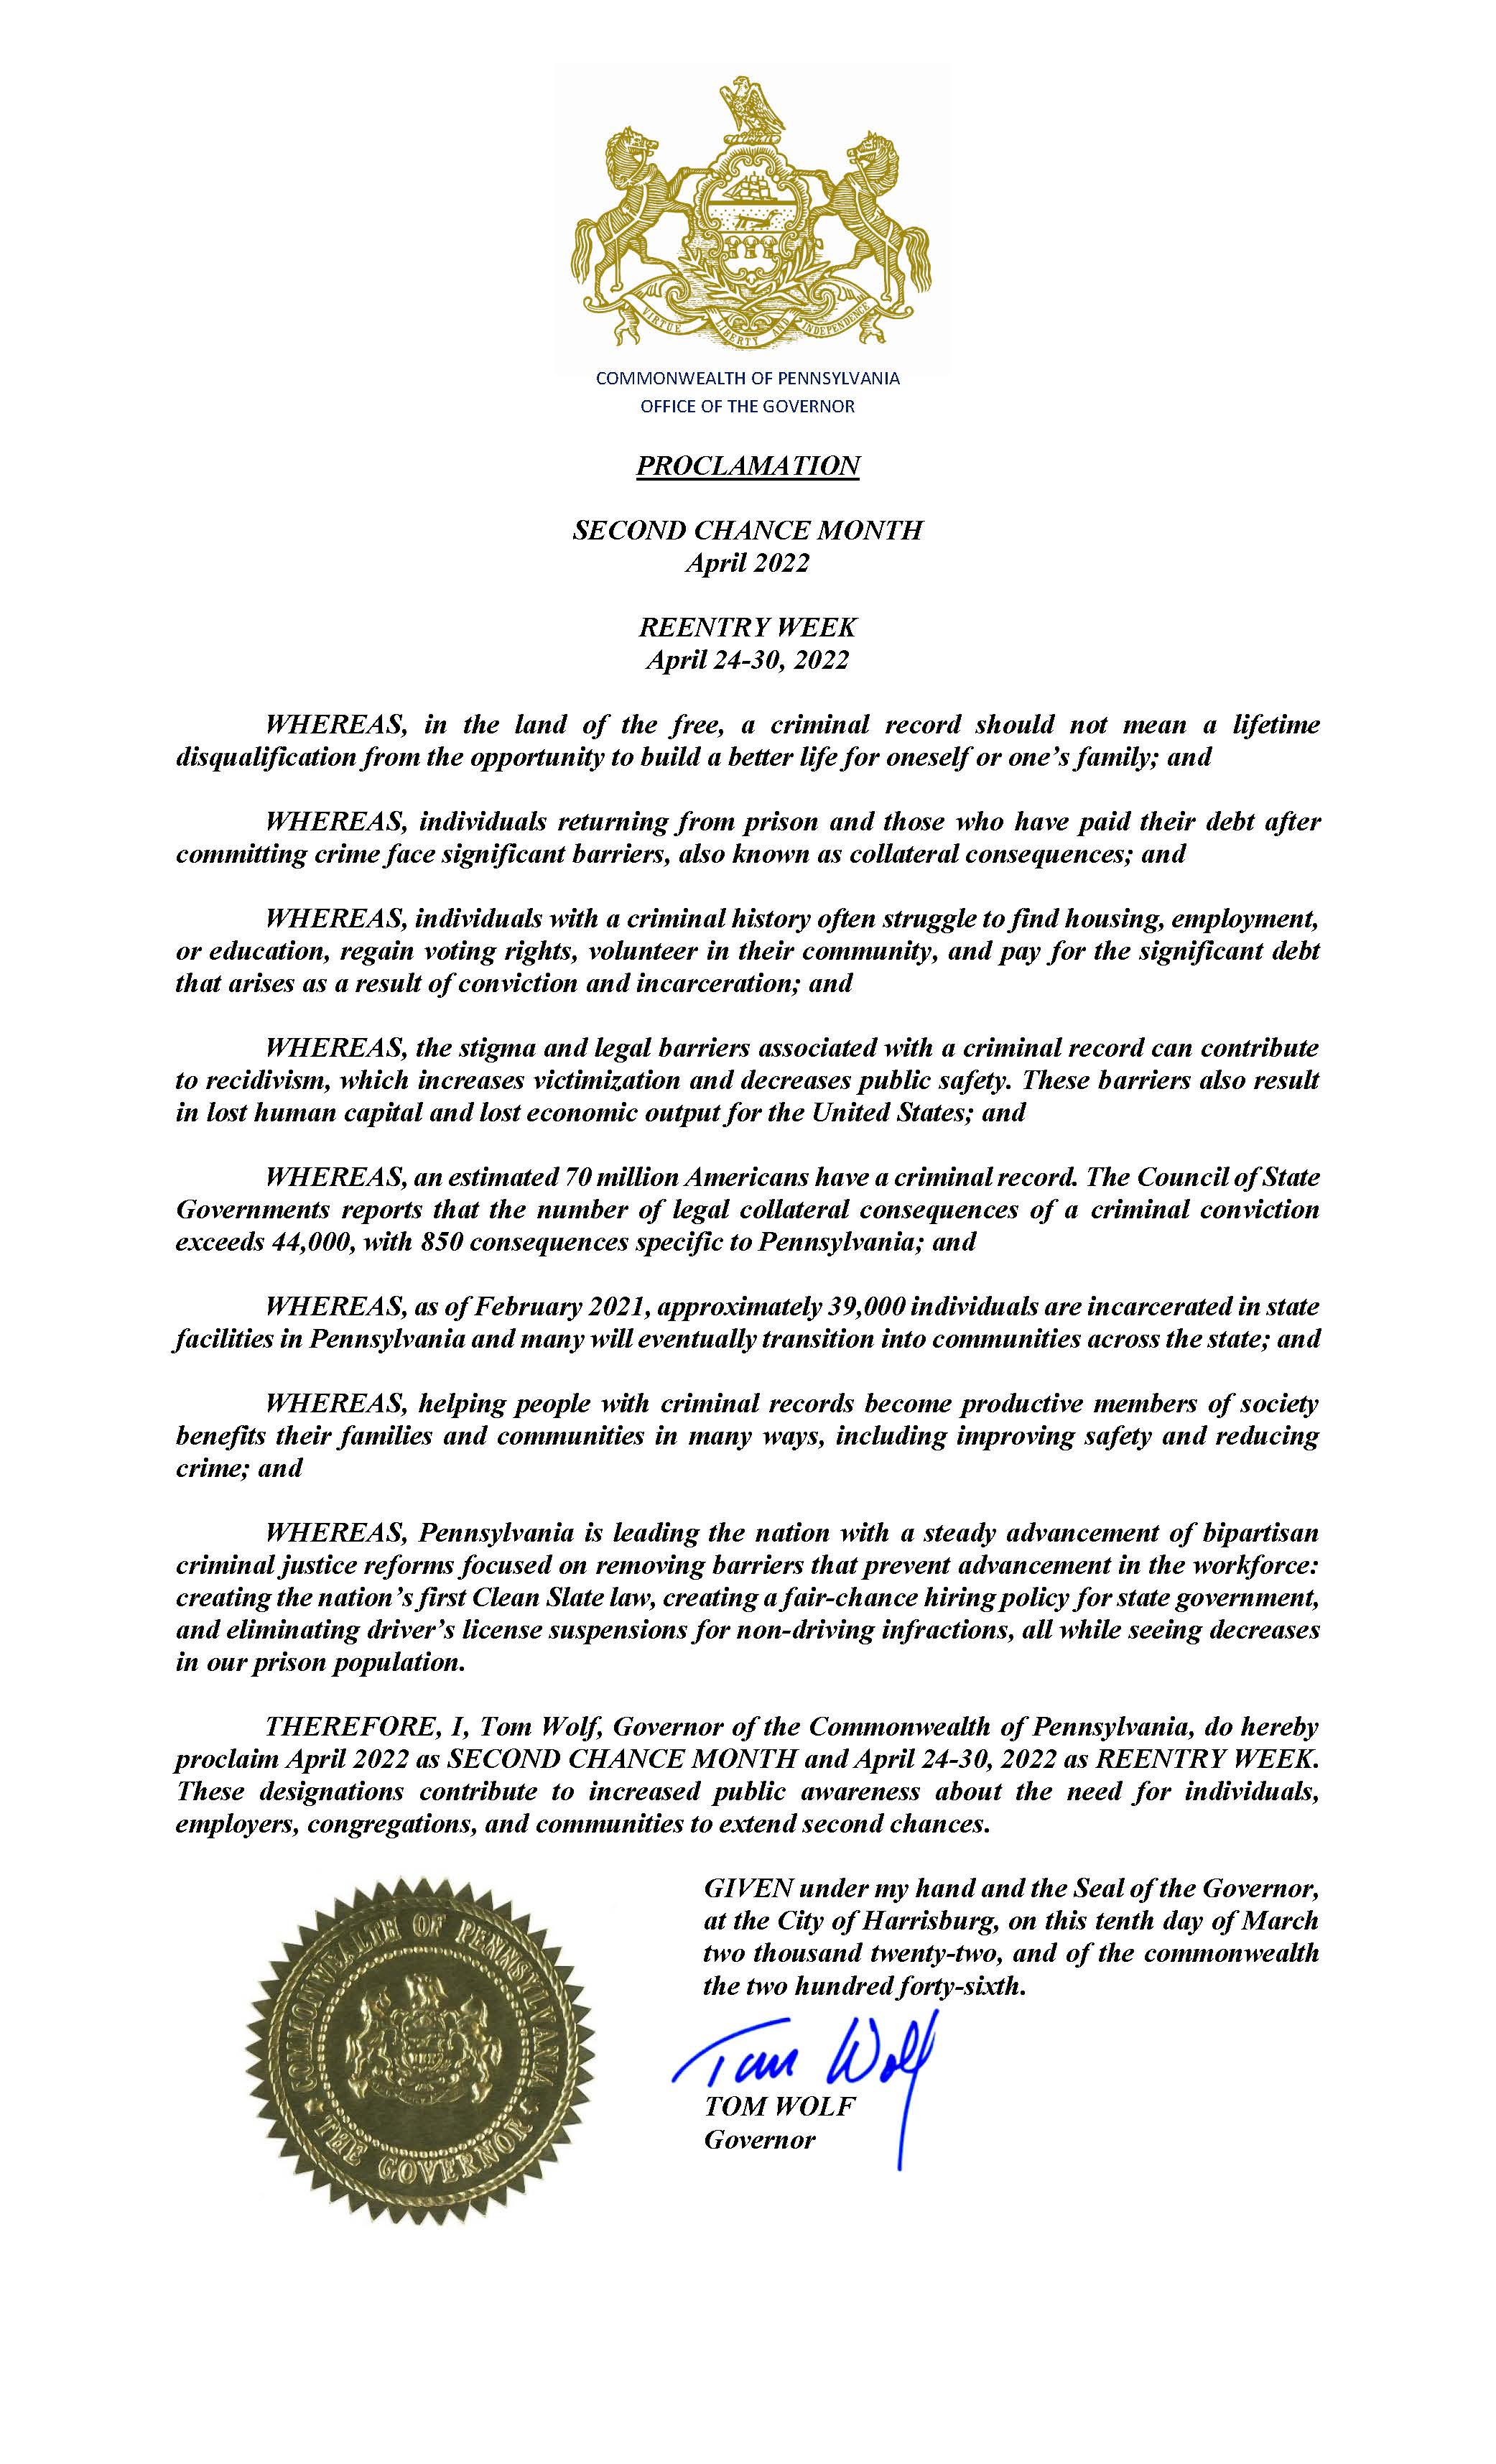 A proclamation by Gov. Wolf for Second Chance Month